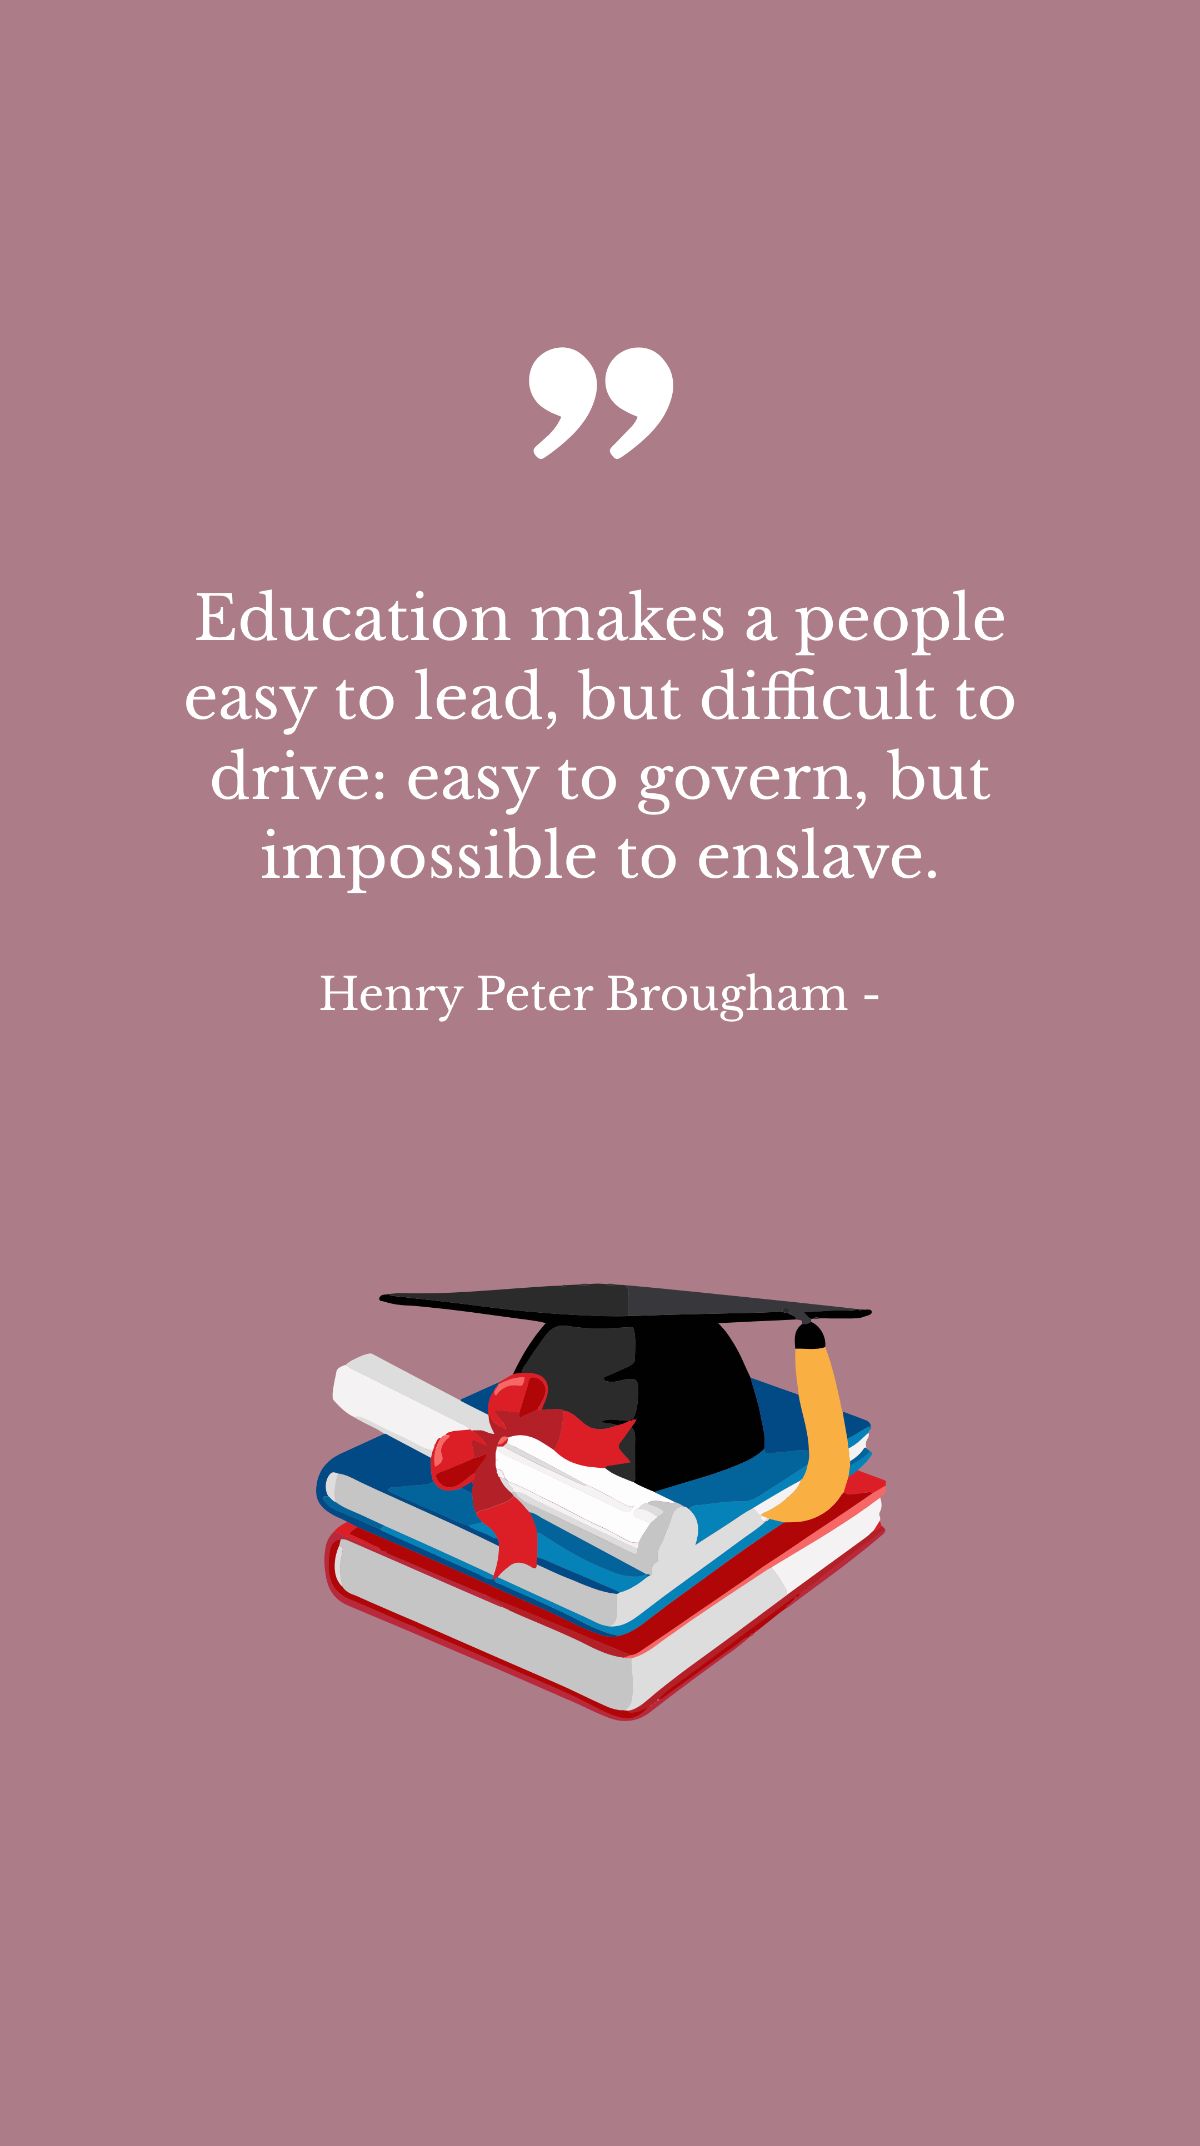 Henry Peter Brougham - Education makes a people easy to lead, but difficult to drive: easy to govern, but impossible to enslave. Template